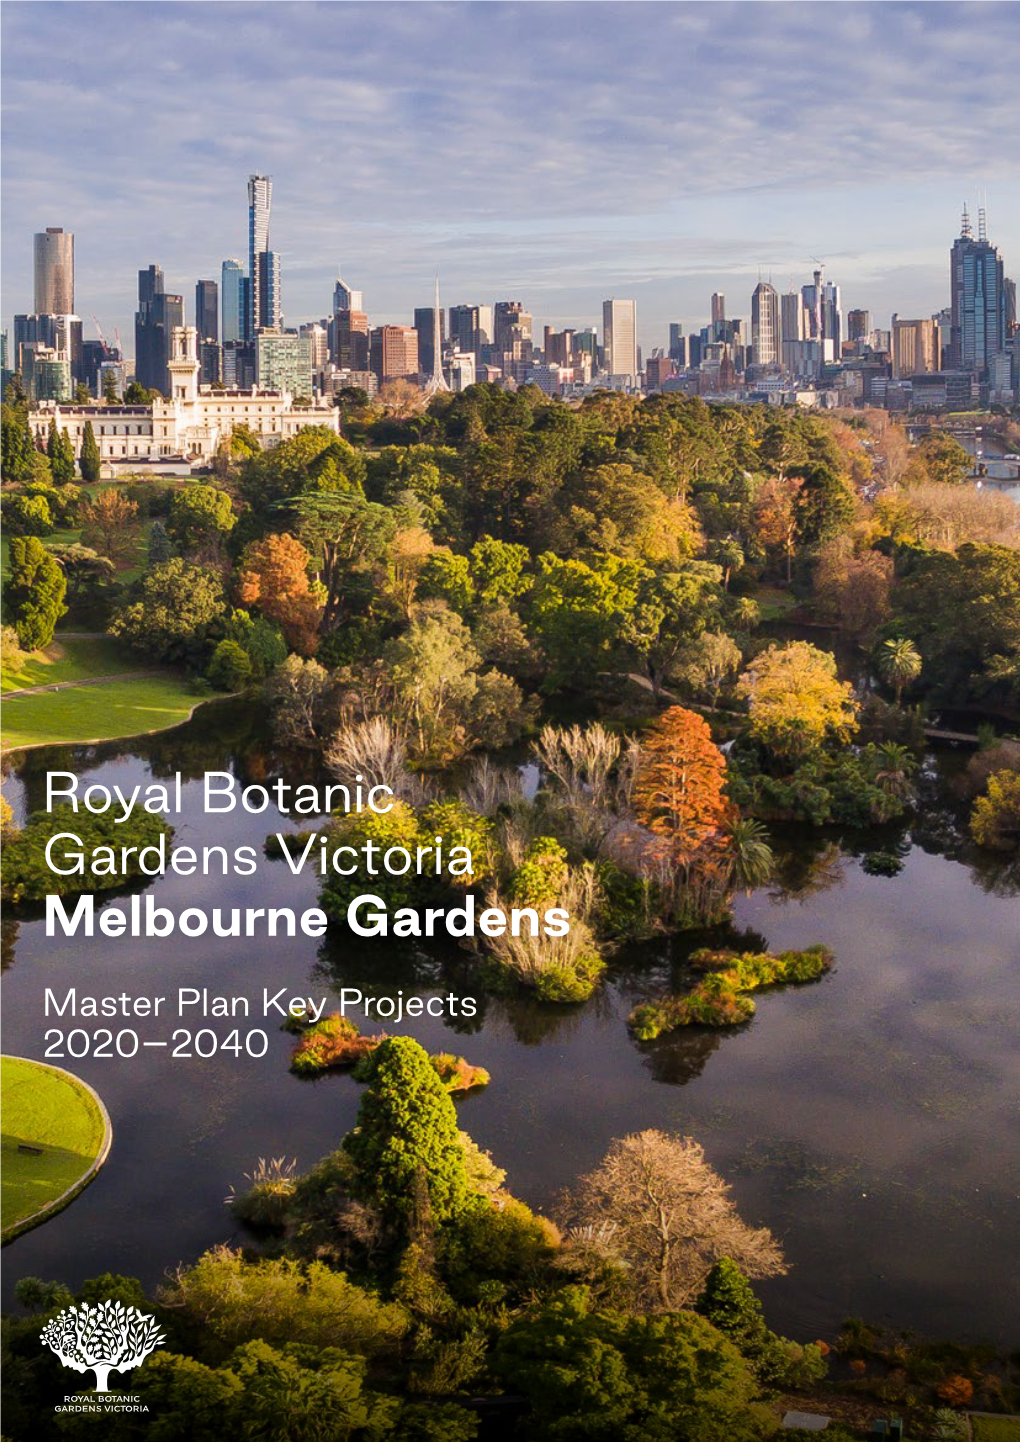 Melbourne Gardens Master Plan 2020-2040 Key Projects